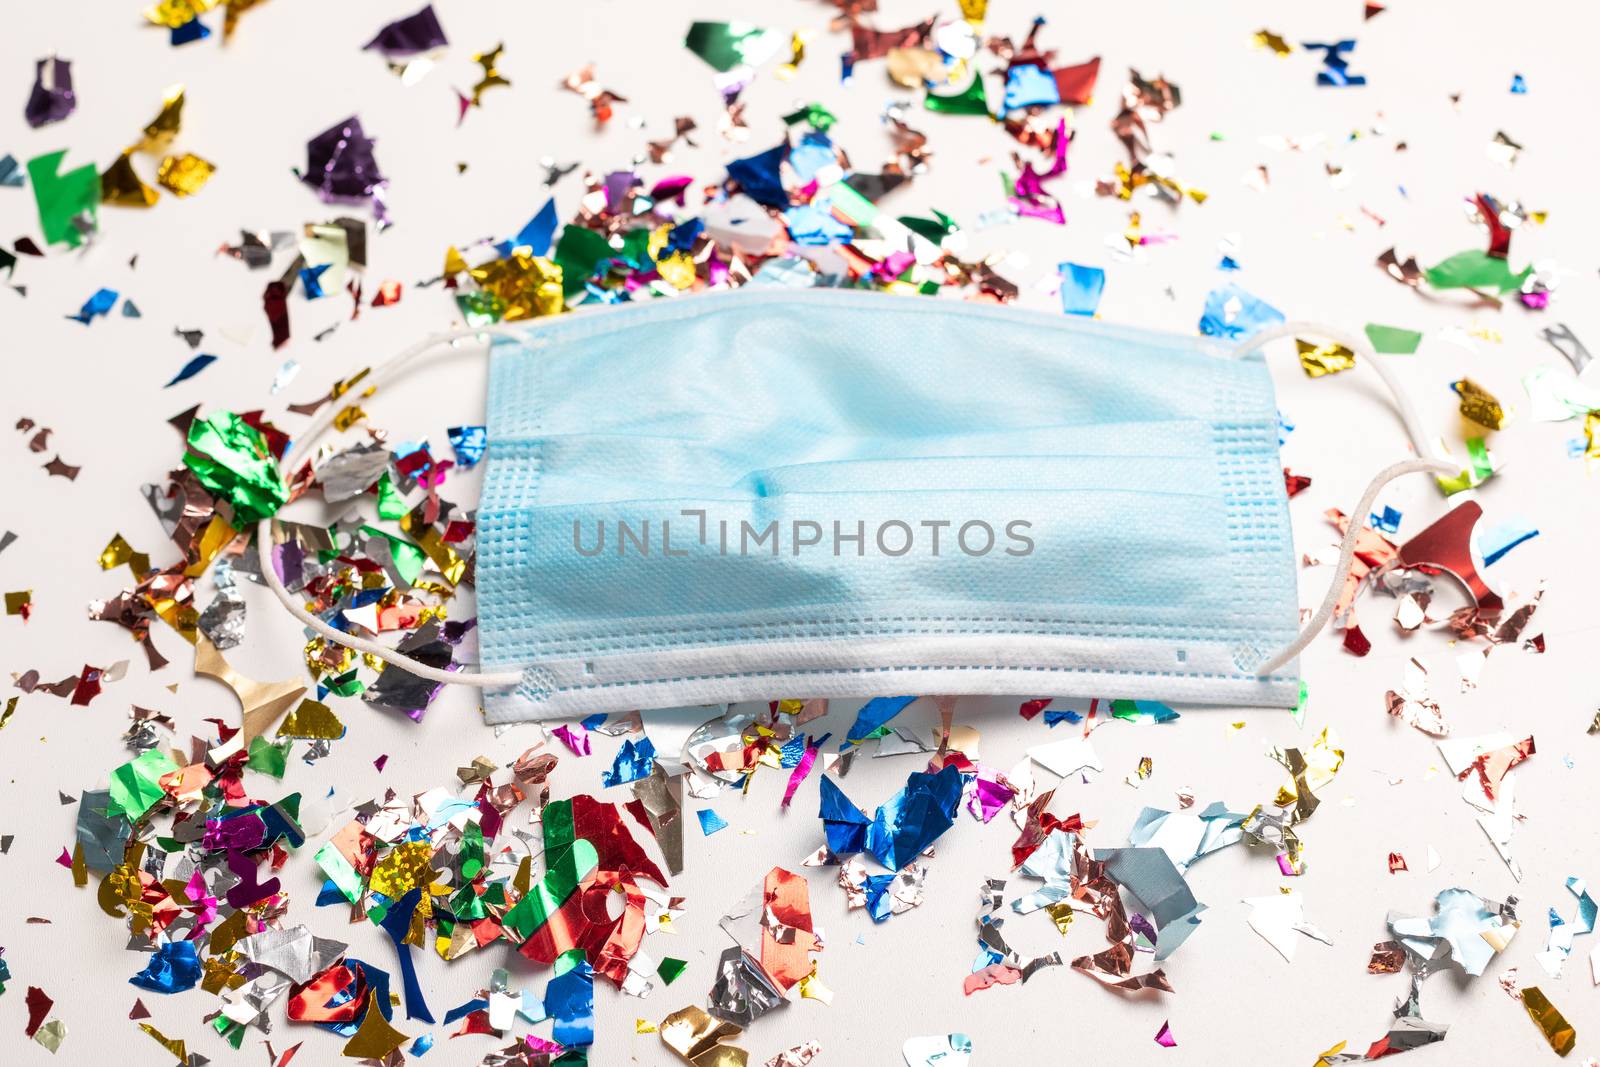 Surgical face mask droped on flor with confetti after celebration new year 2021 party background stock image